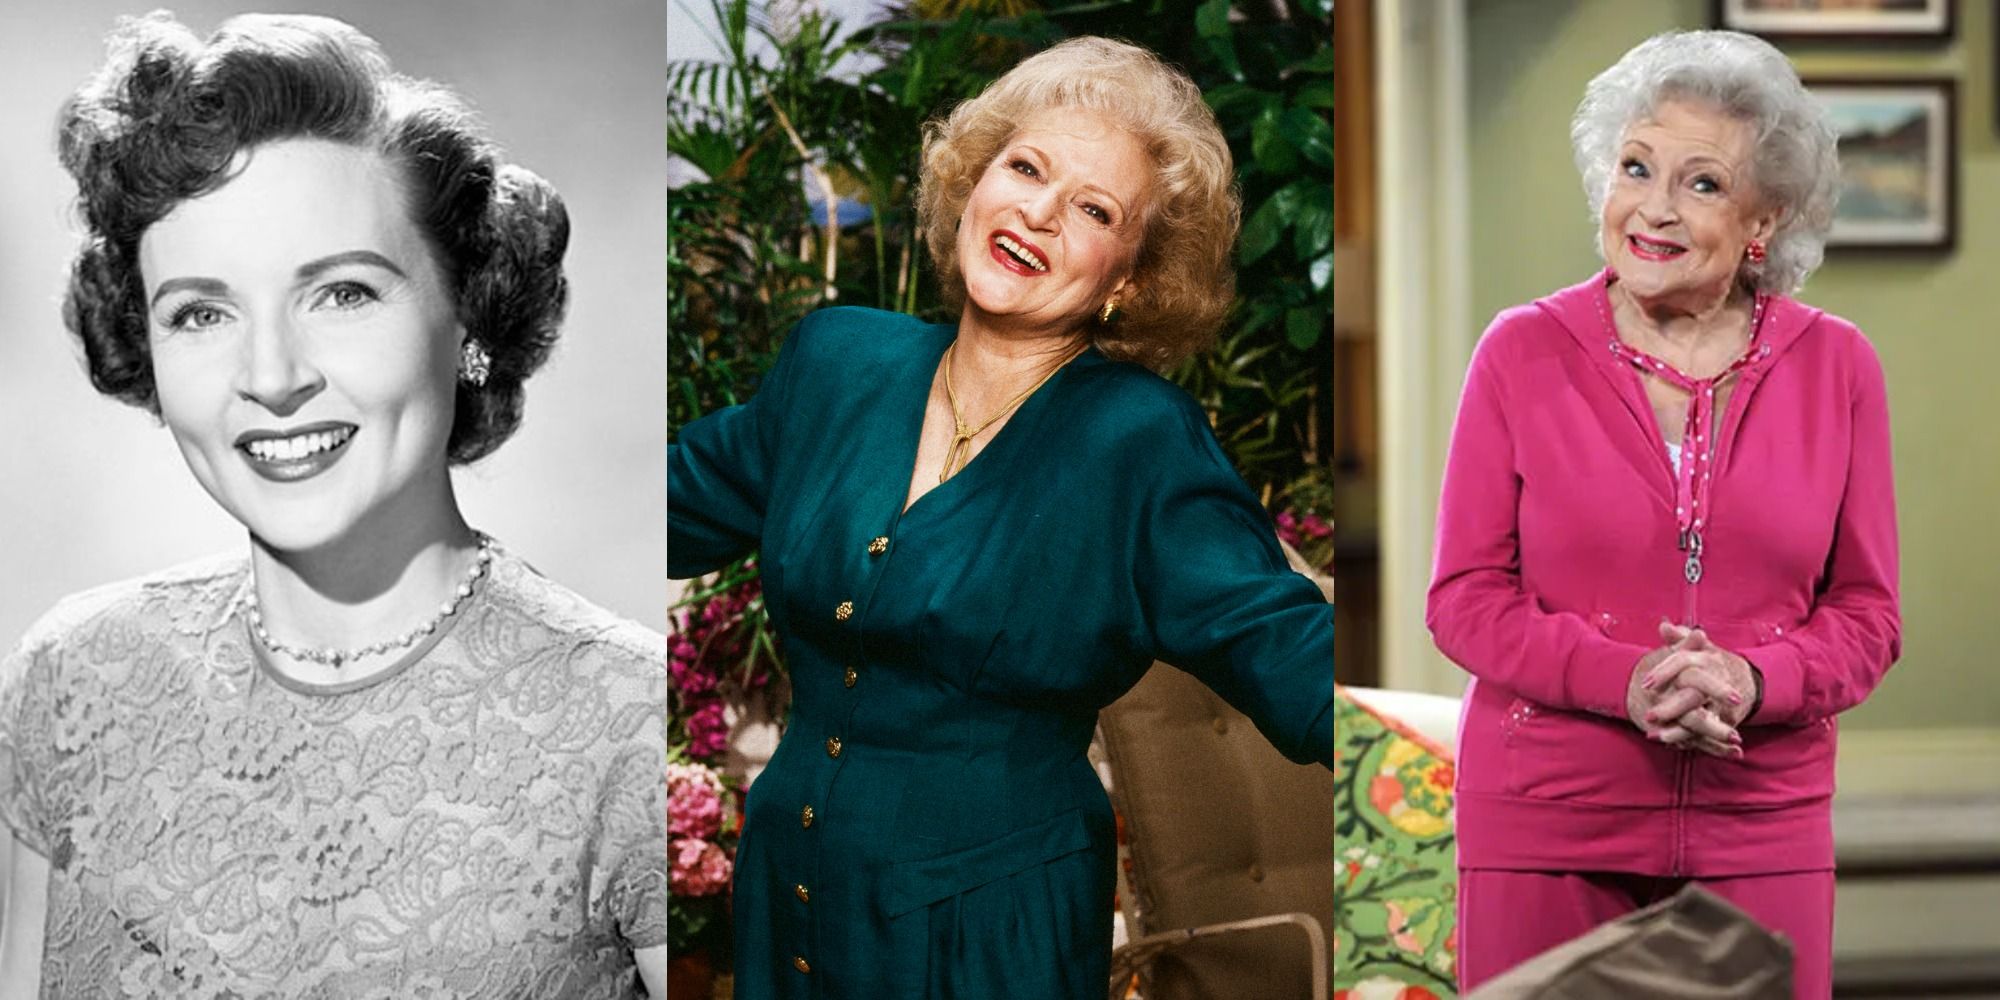 Betty White as Elizabeth in Life With Elizabeth, Rose in The Golden Girls, and Elka in Hot in Cleveland